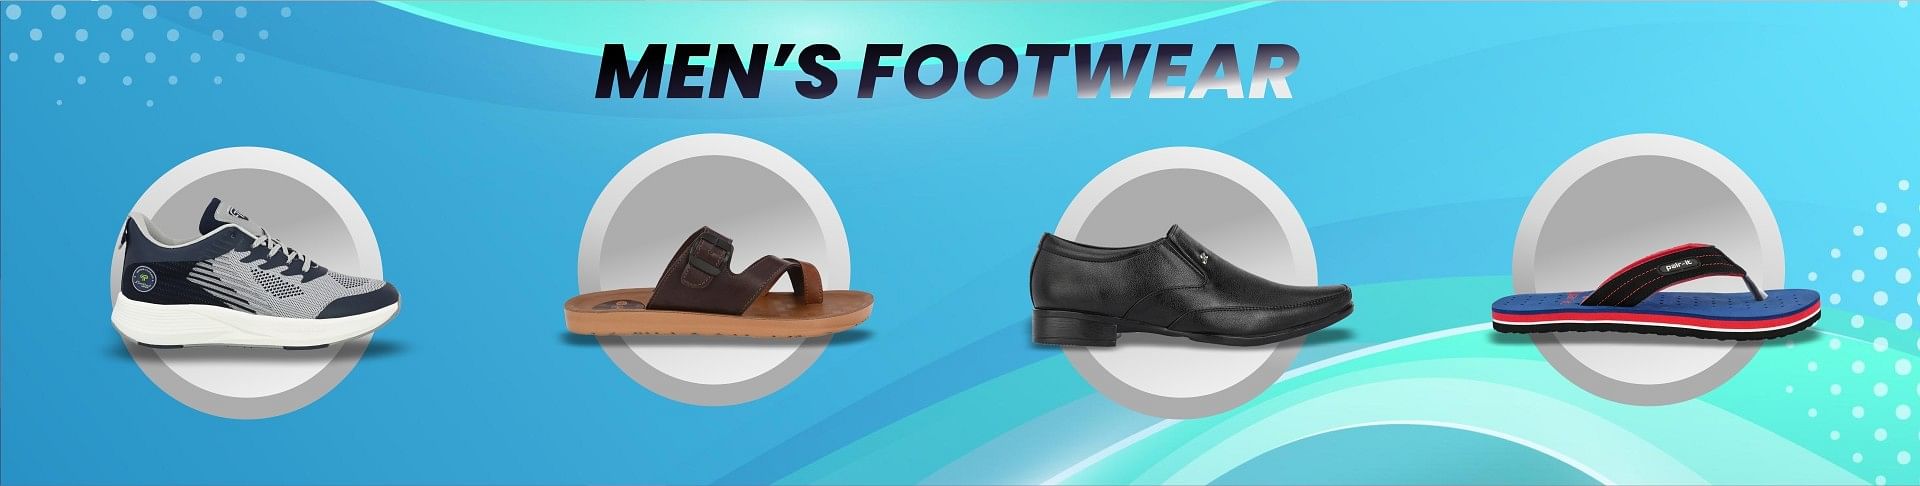 FOOTWEARS, Mens, Pu Moulded Insole